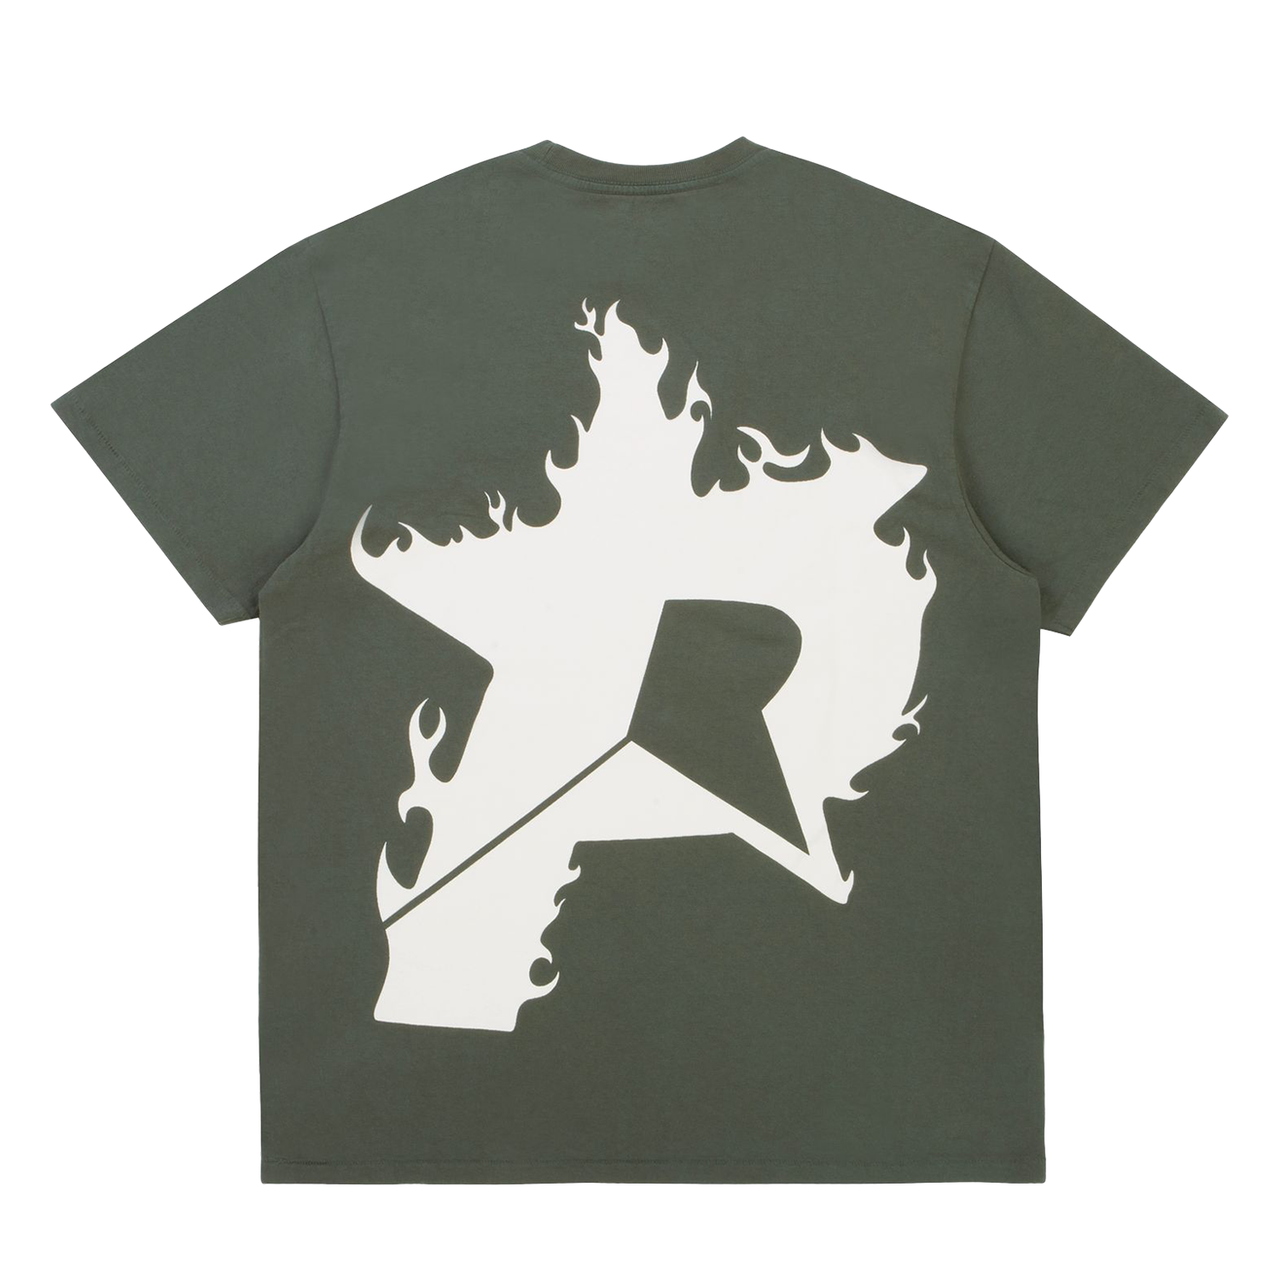 Pieces P Star Flames Tee Forest Green